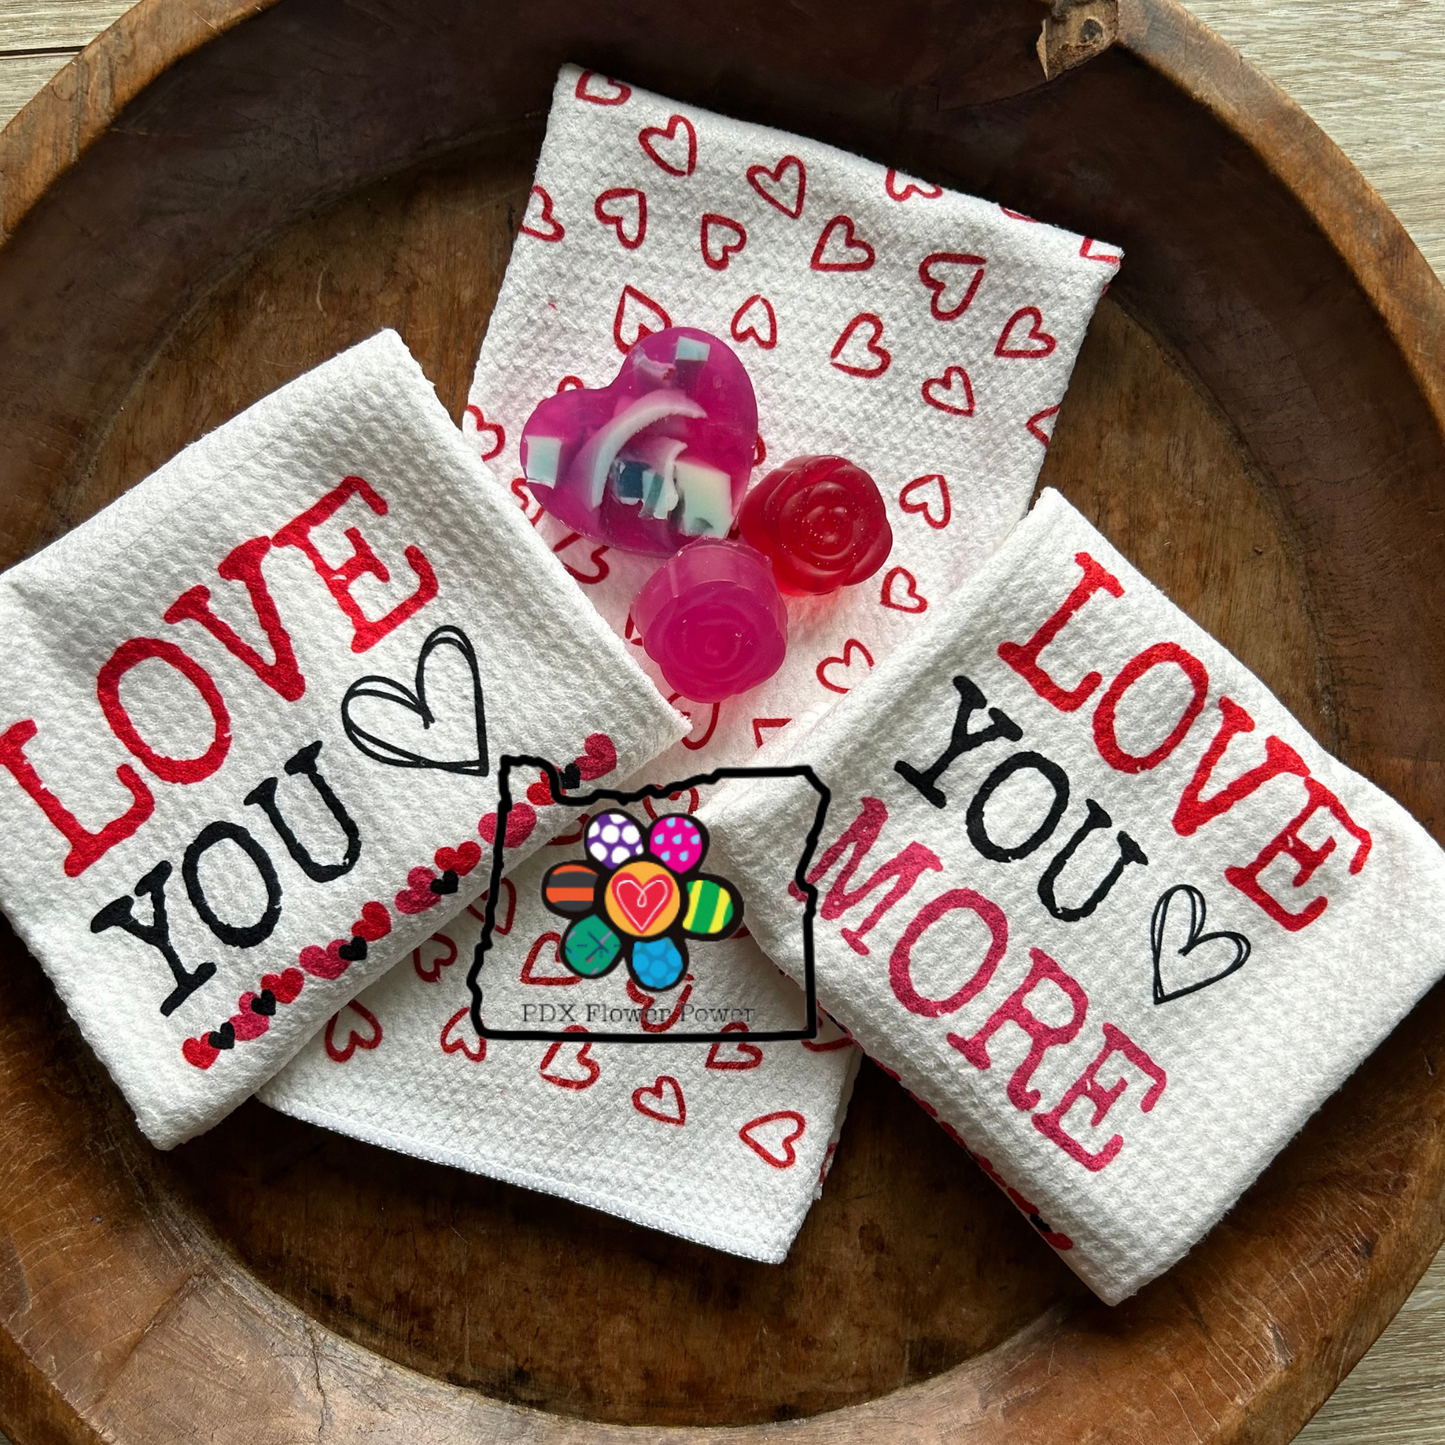 Love You, Love You More towel and soap set. Happy Valentine's Day gift, heart dish towels